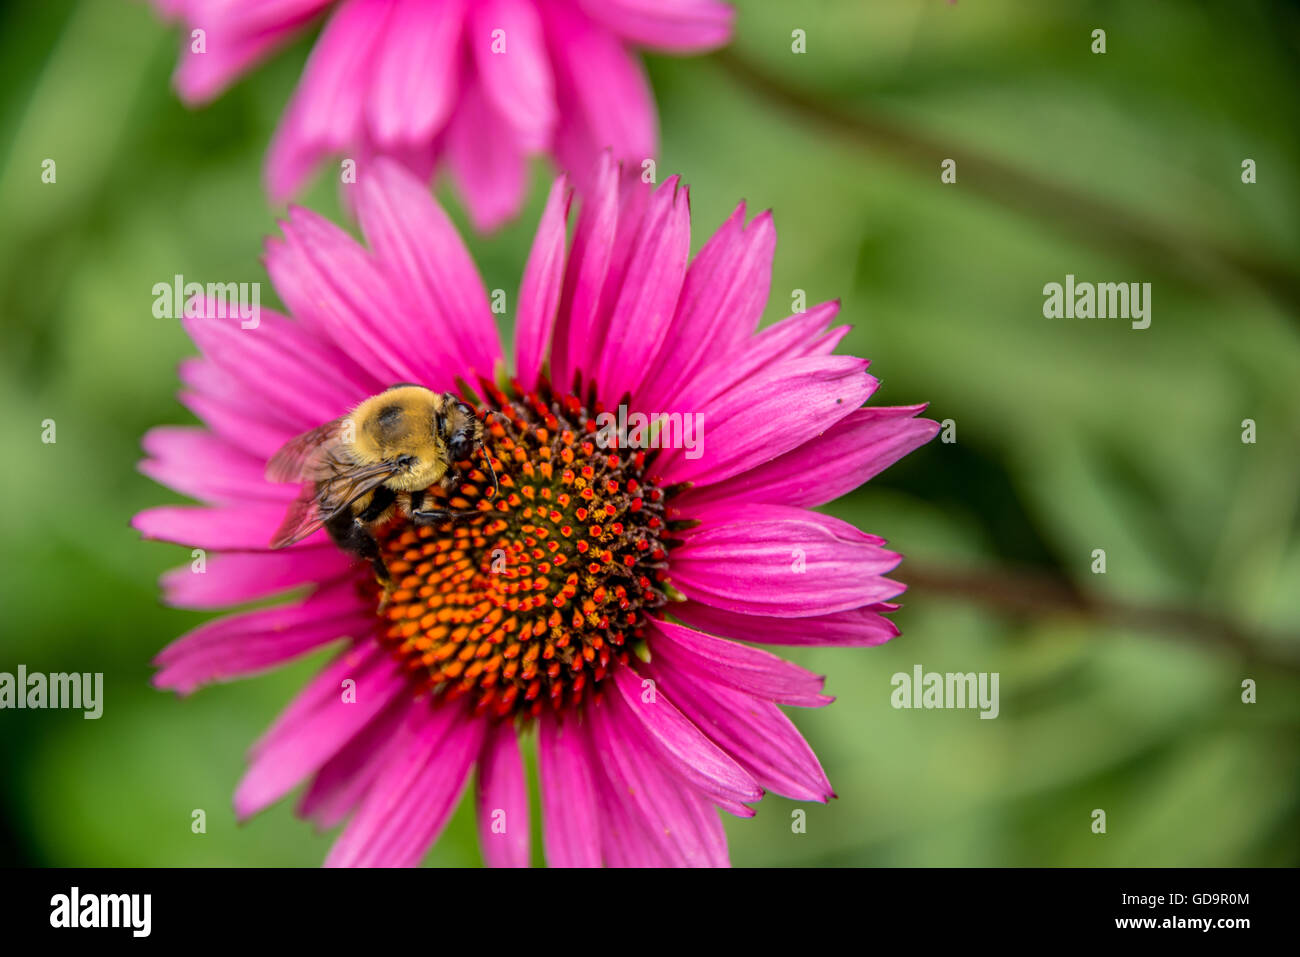 Bumble bee on flower foraging for pollen and nectar, overhead view outdoors in the garden Stock Photo